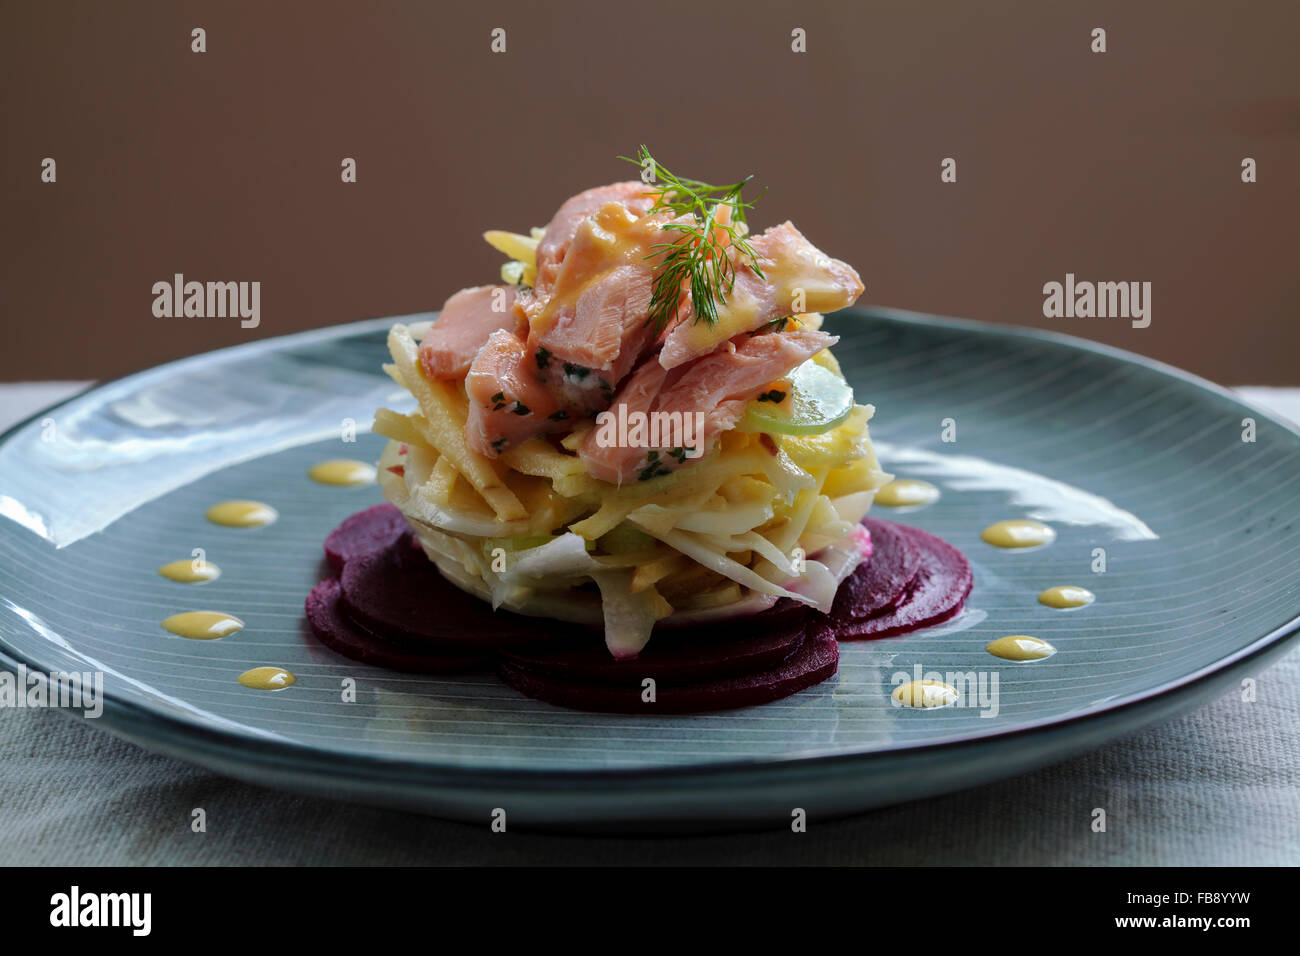 Salad with smoked trout, fennel, apple and beetroot Stock Photo